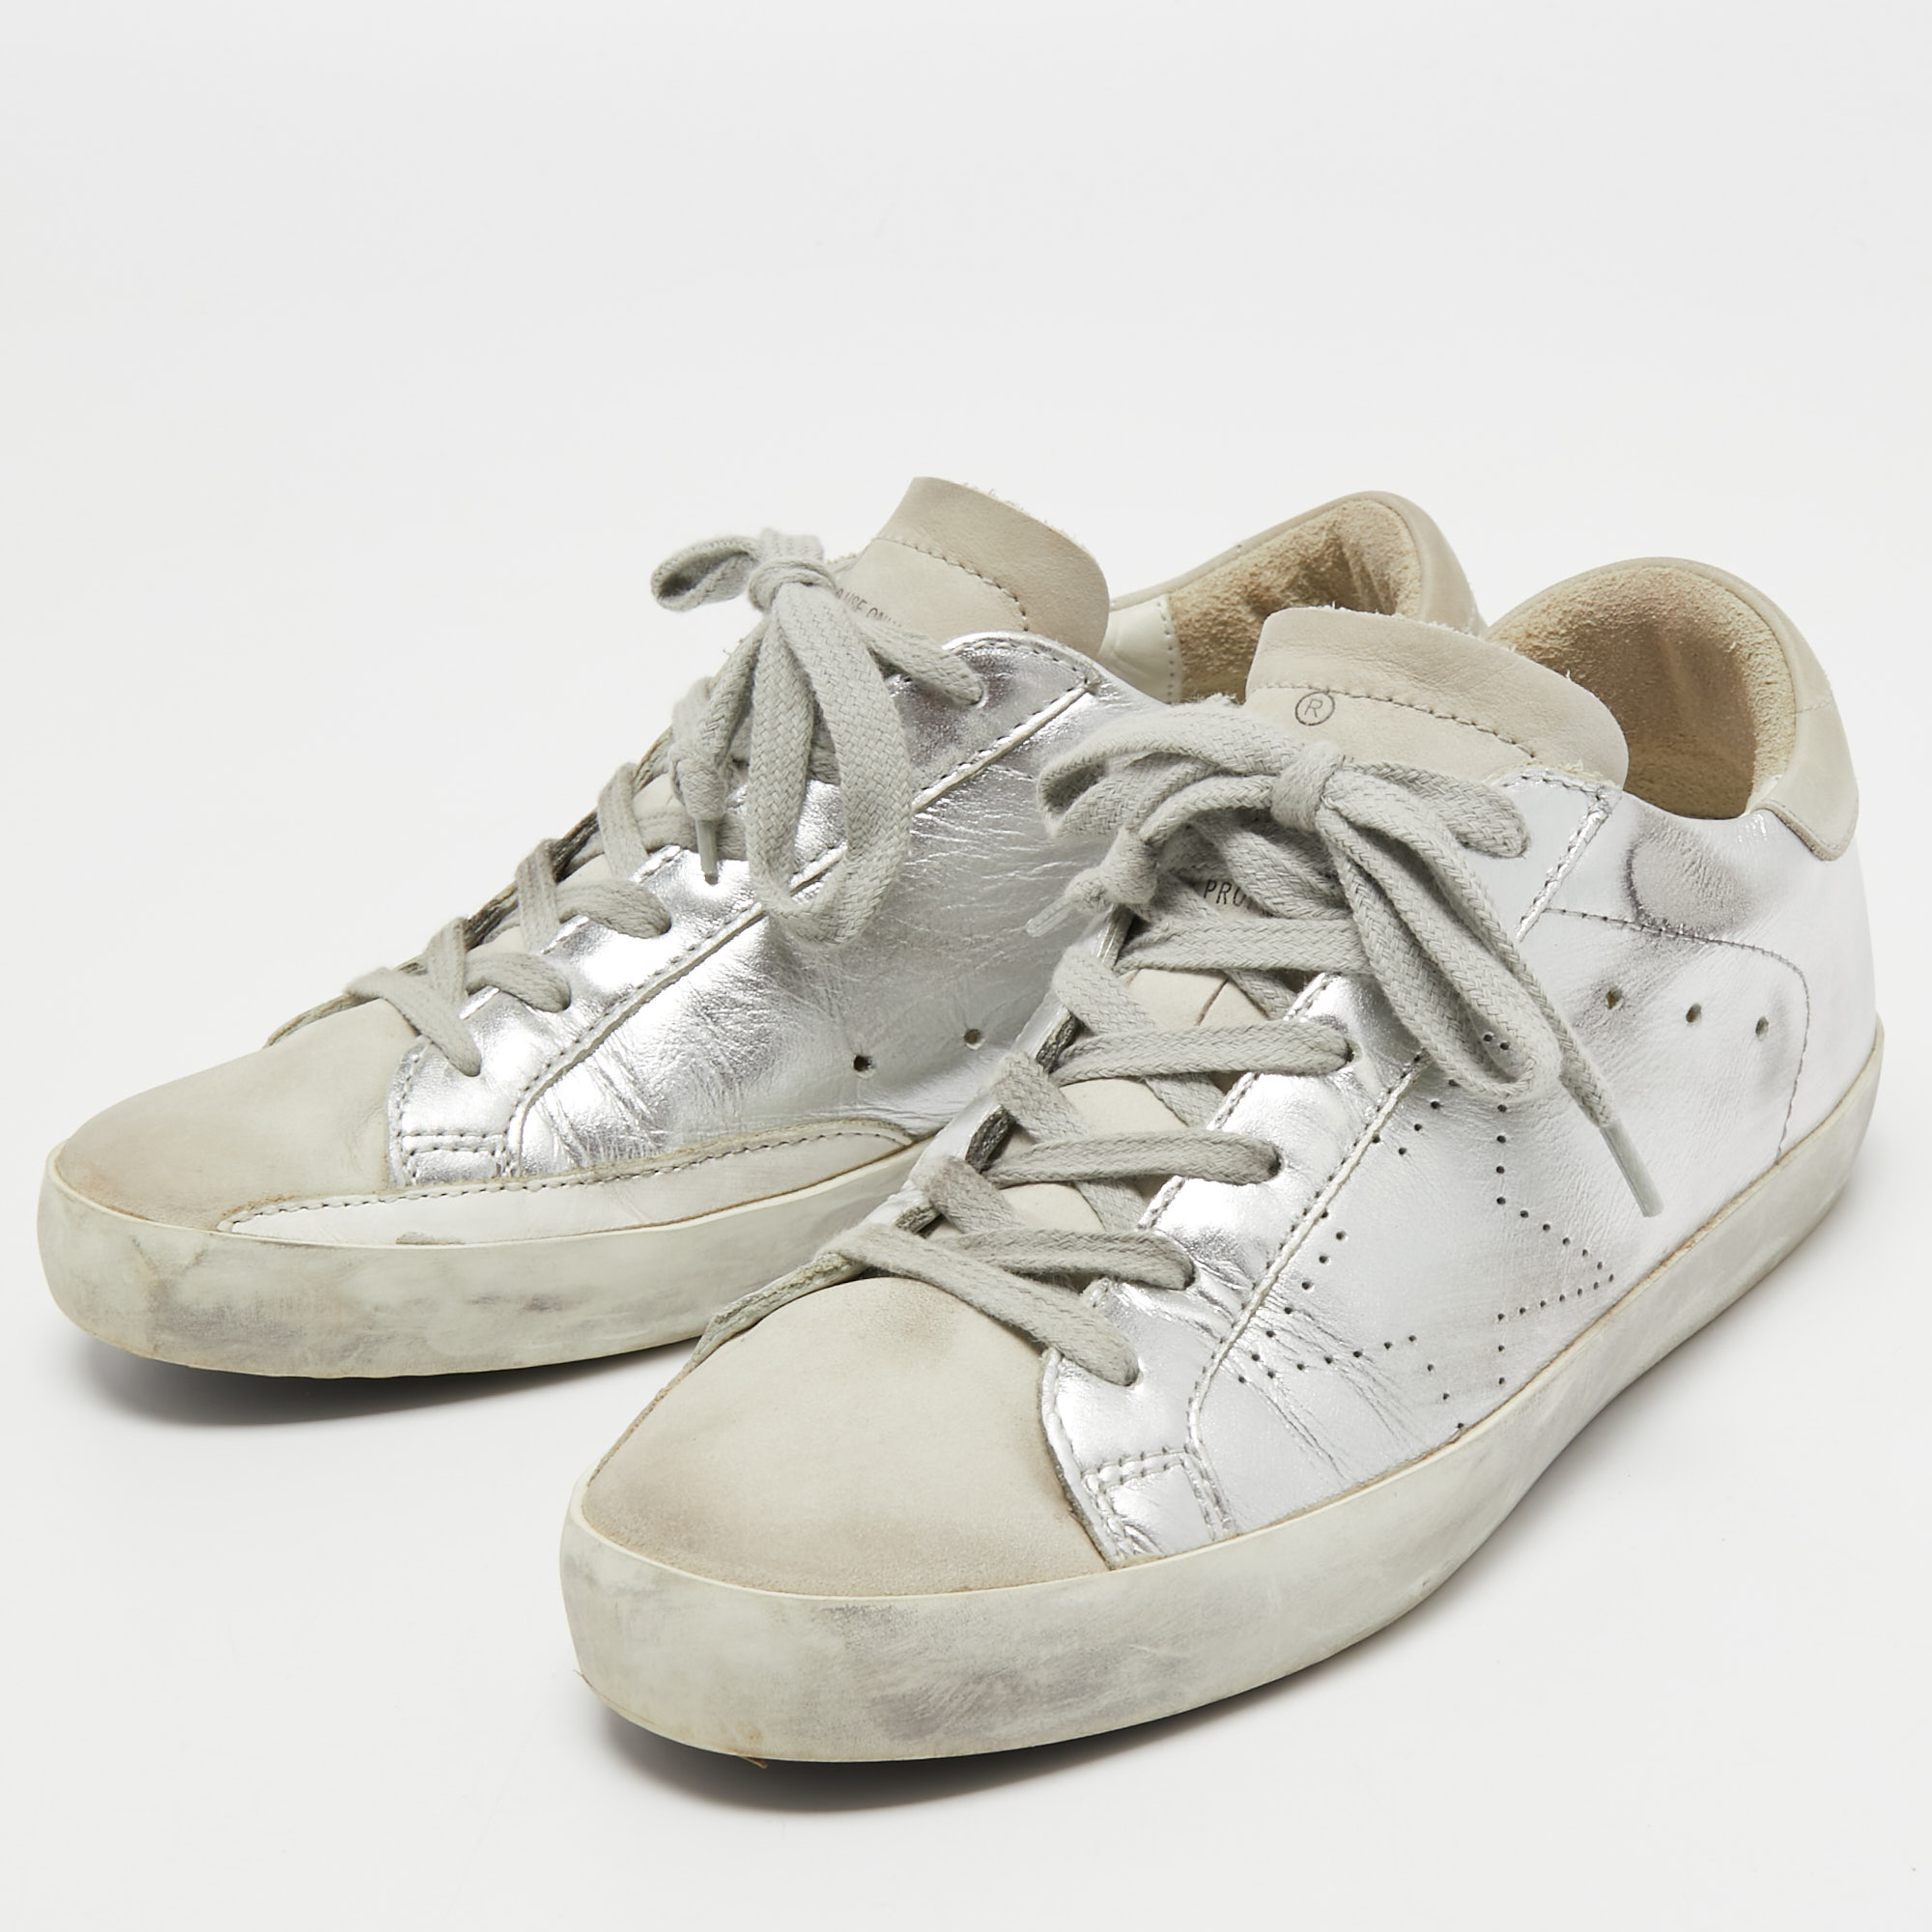 

Golden Goose Silver/White Leather and Suede Superstar Sneakers Size